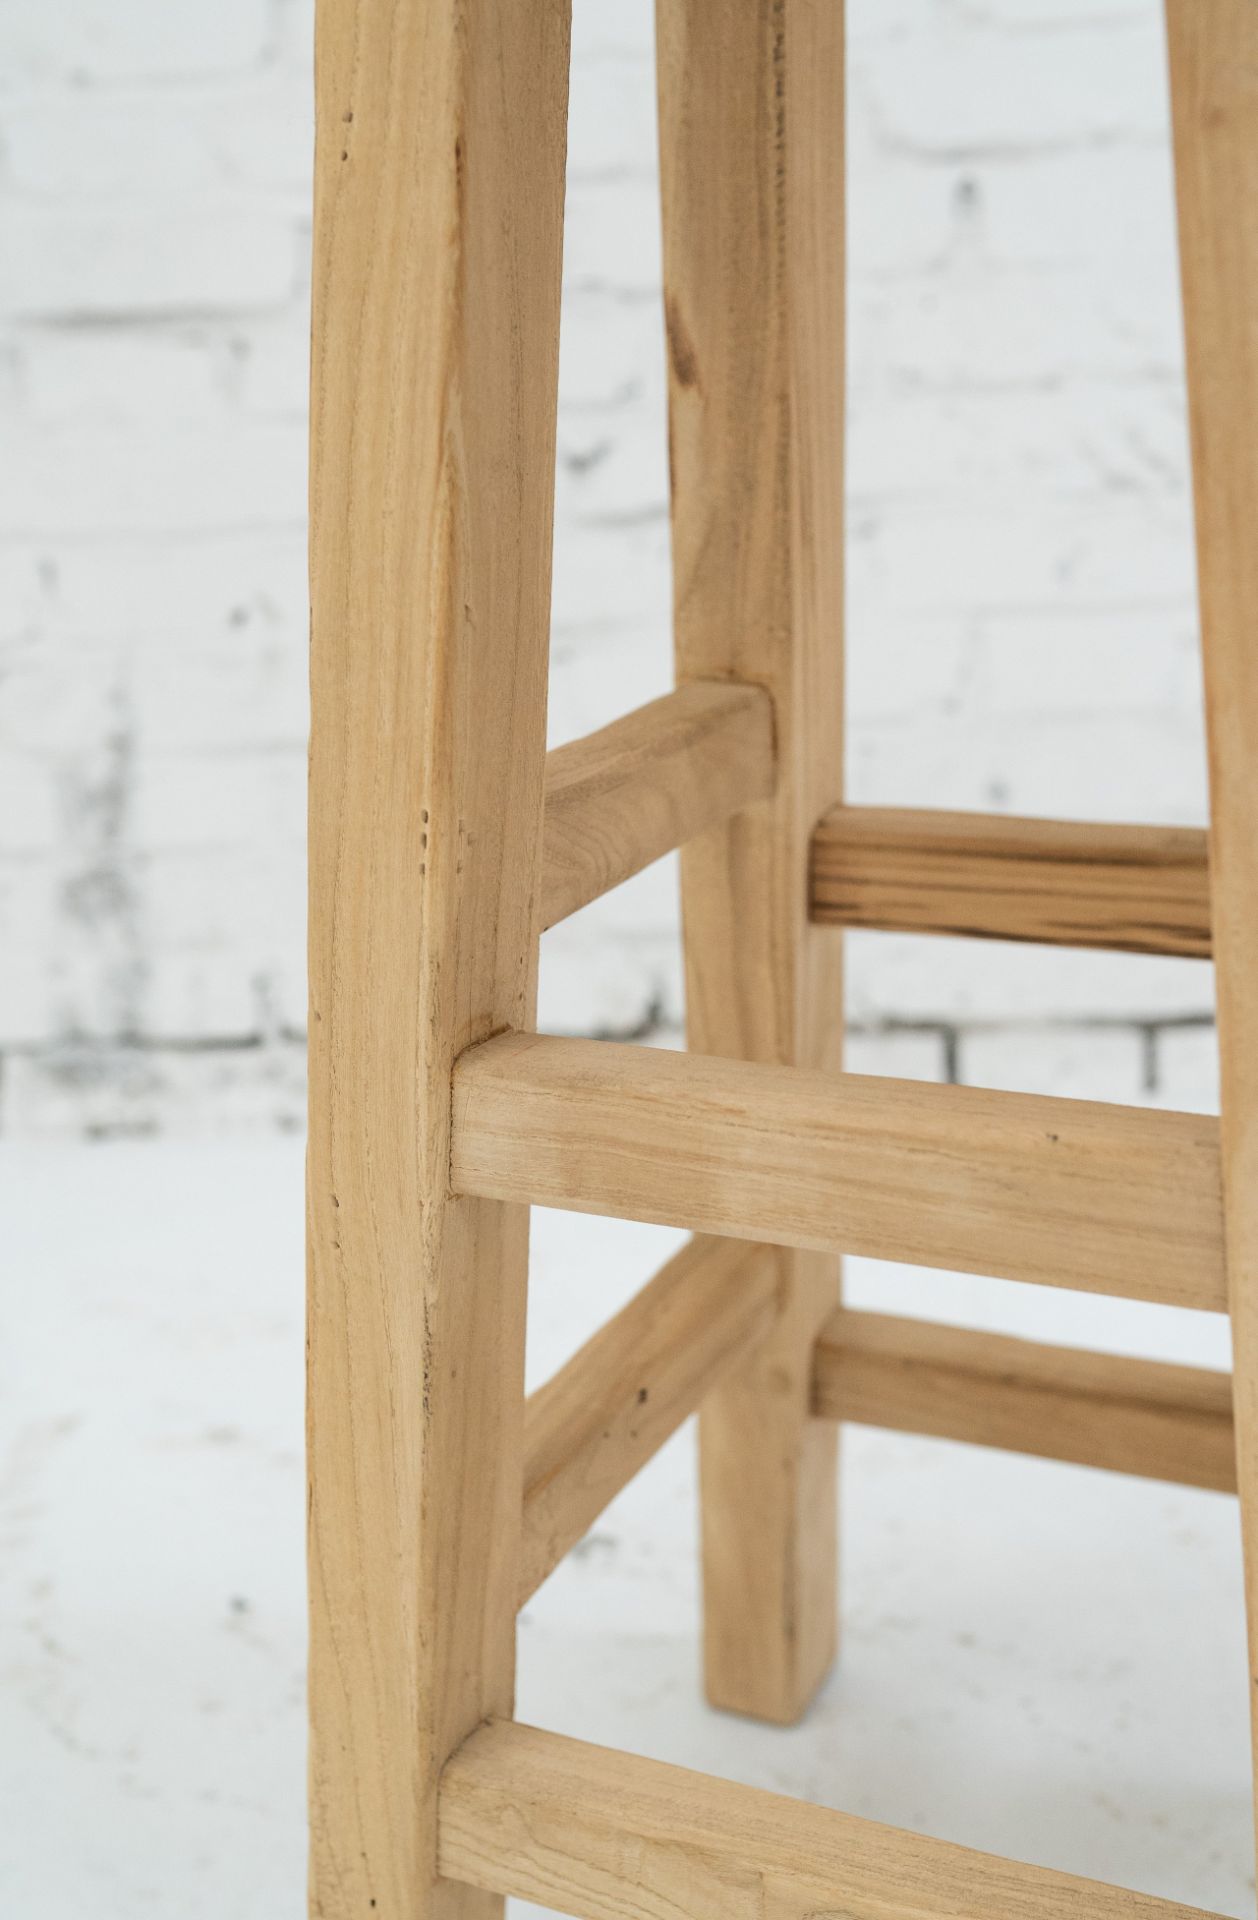 2 x Tall Elm Stool: Stunning wooden bar stools from the Heibei provence of China. - Image 4 of 5